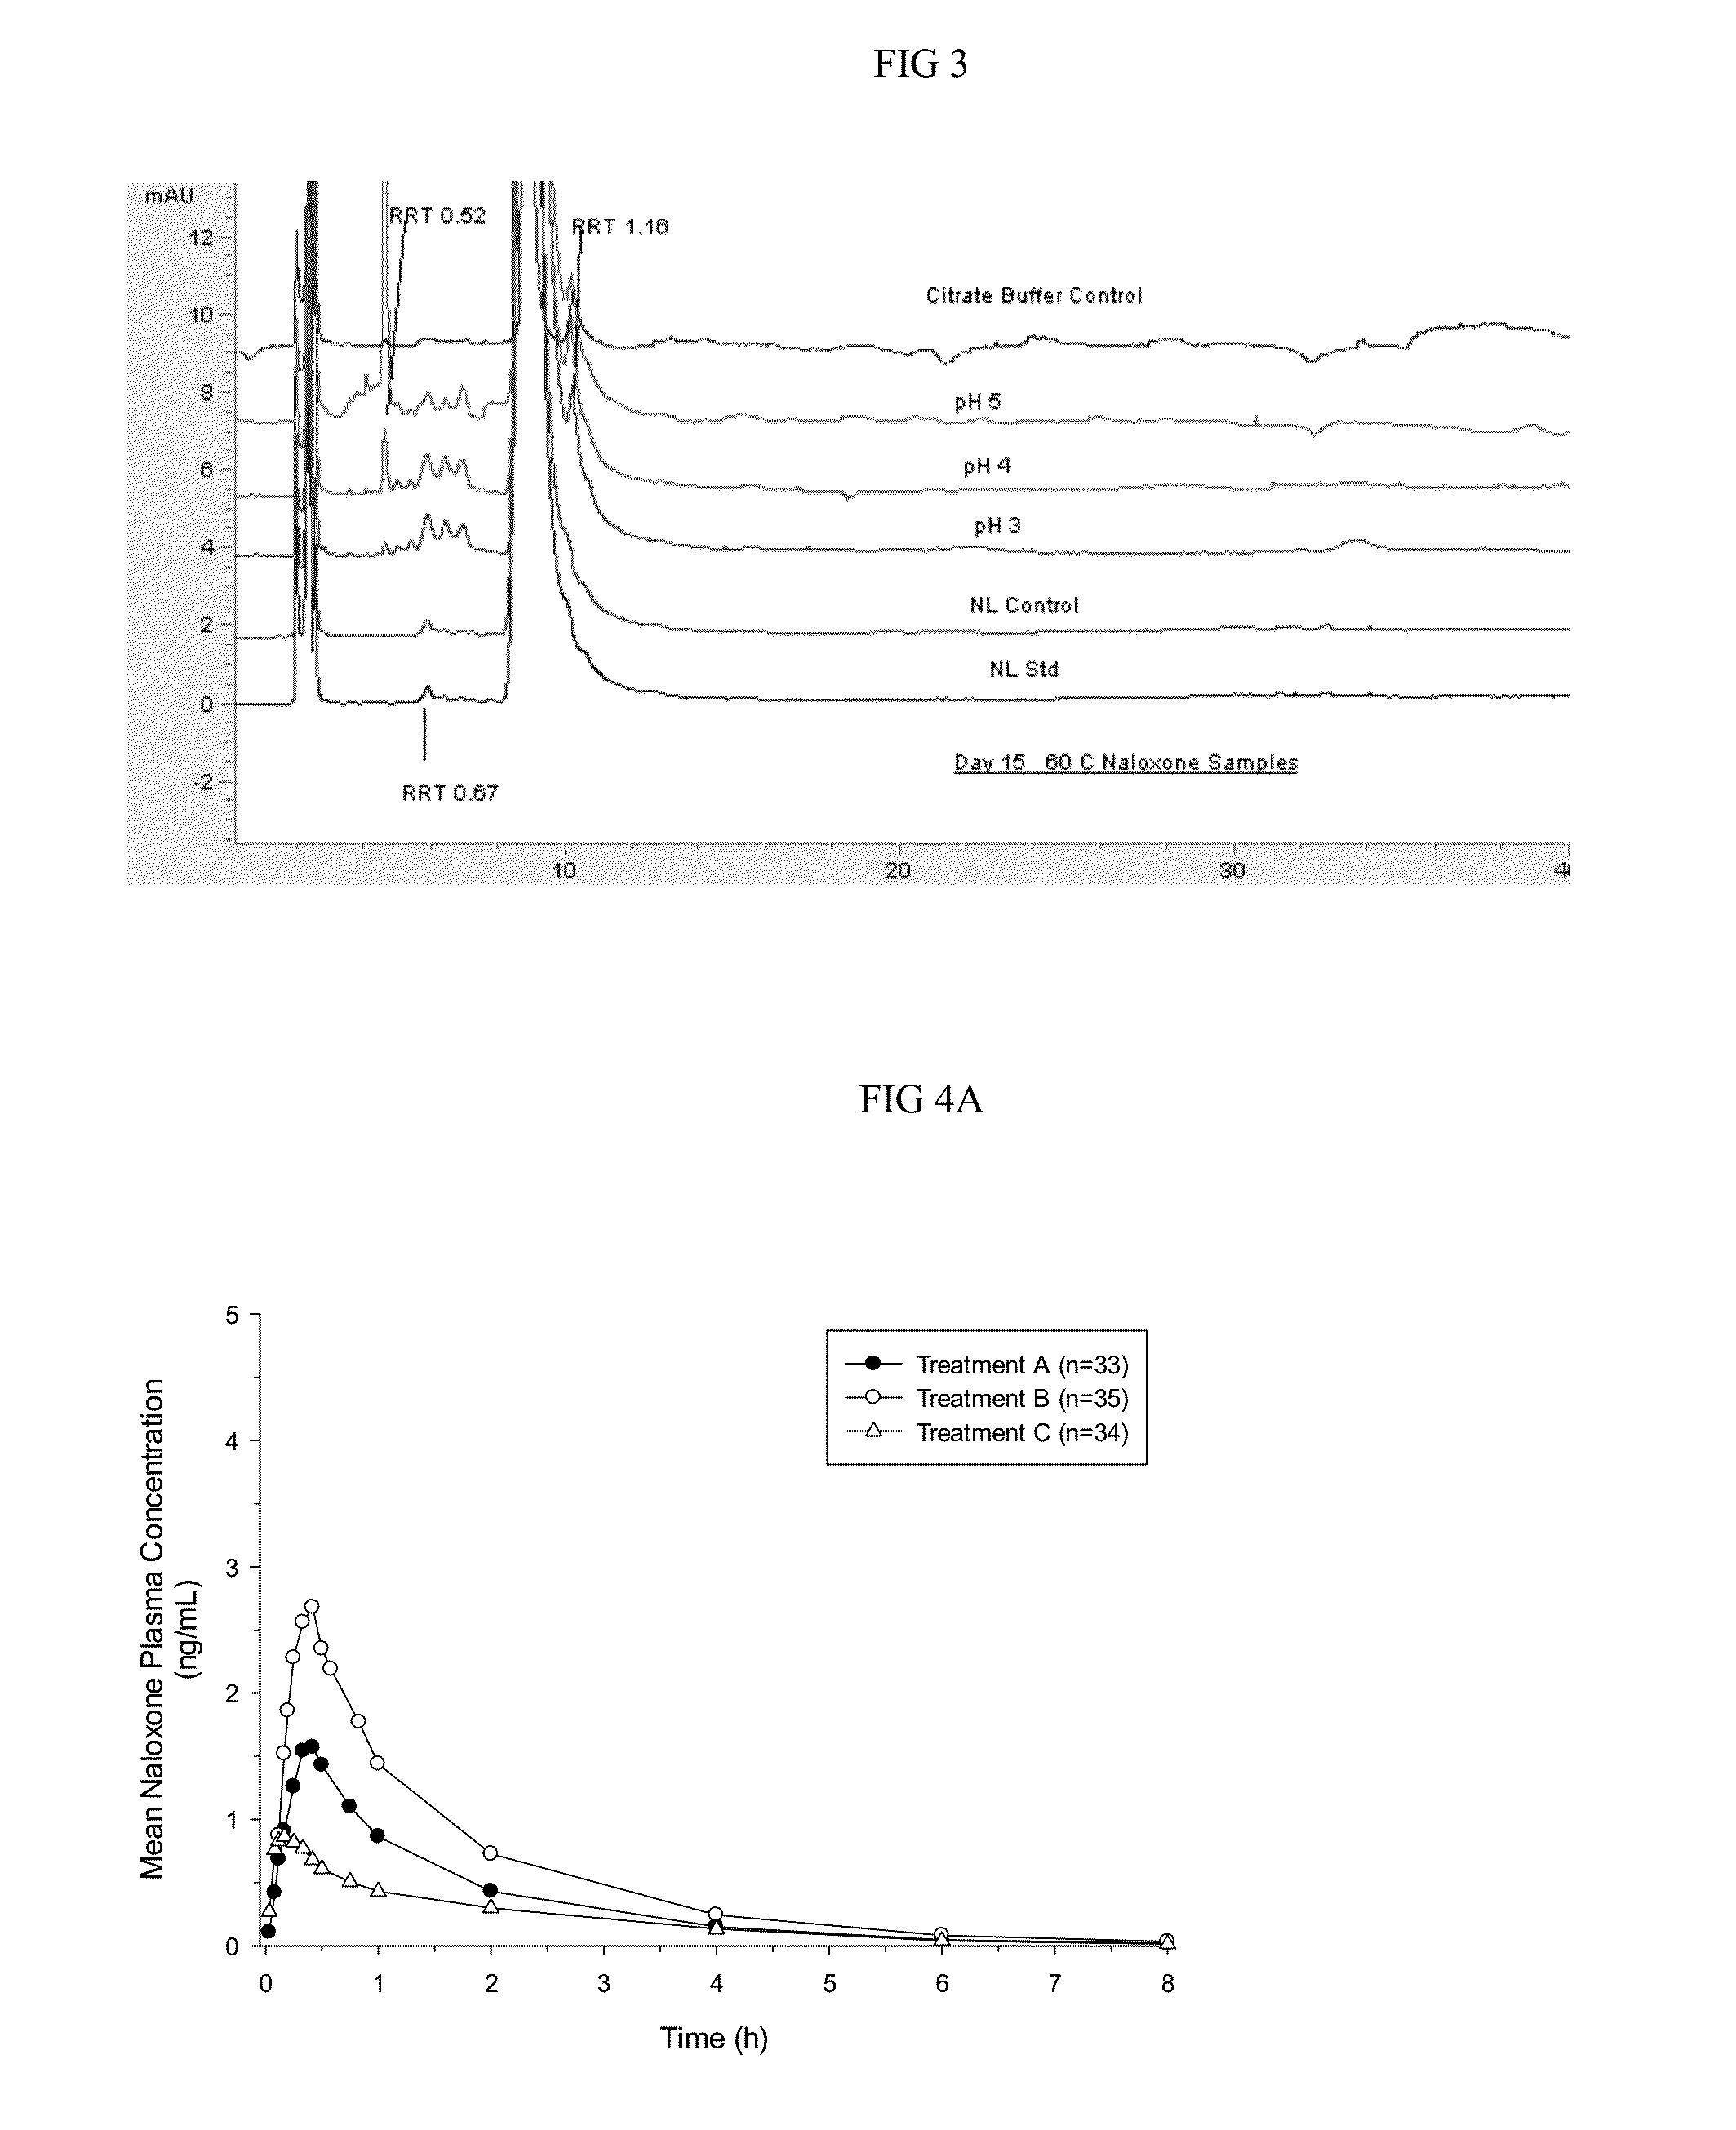 Intranasal naloxone compositions and methods of making and using same